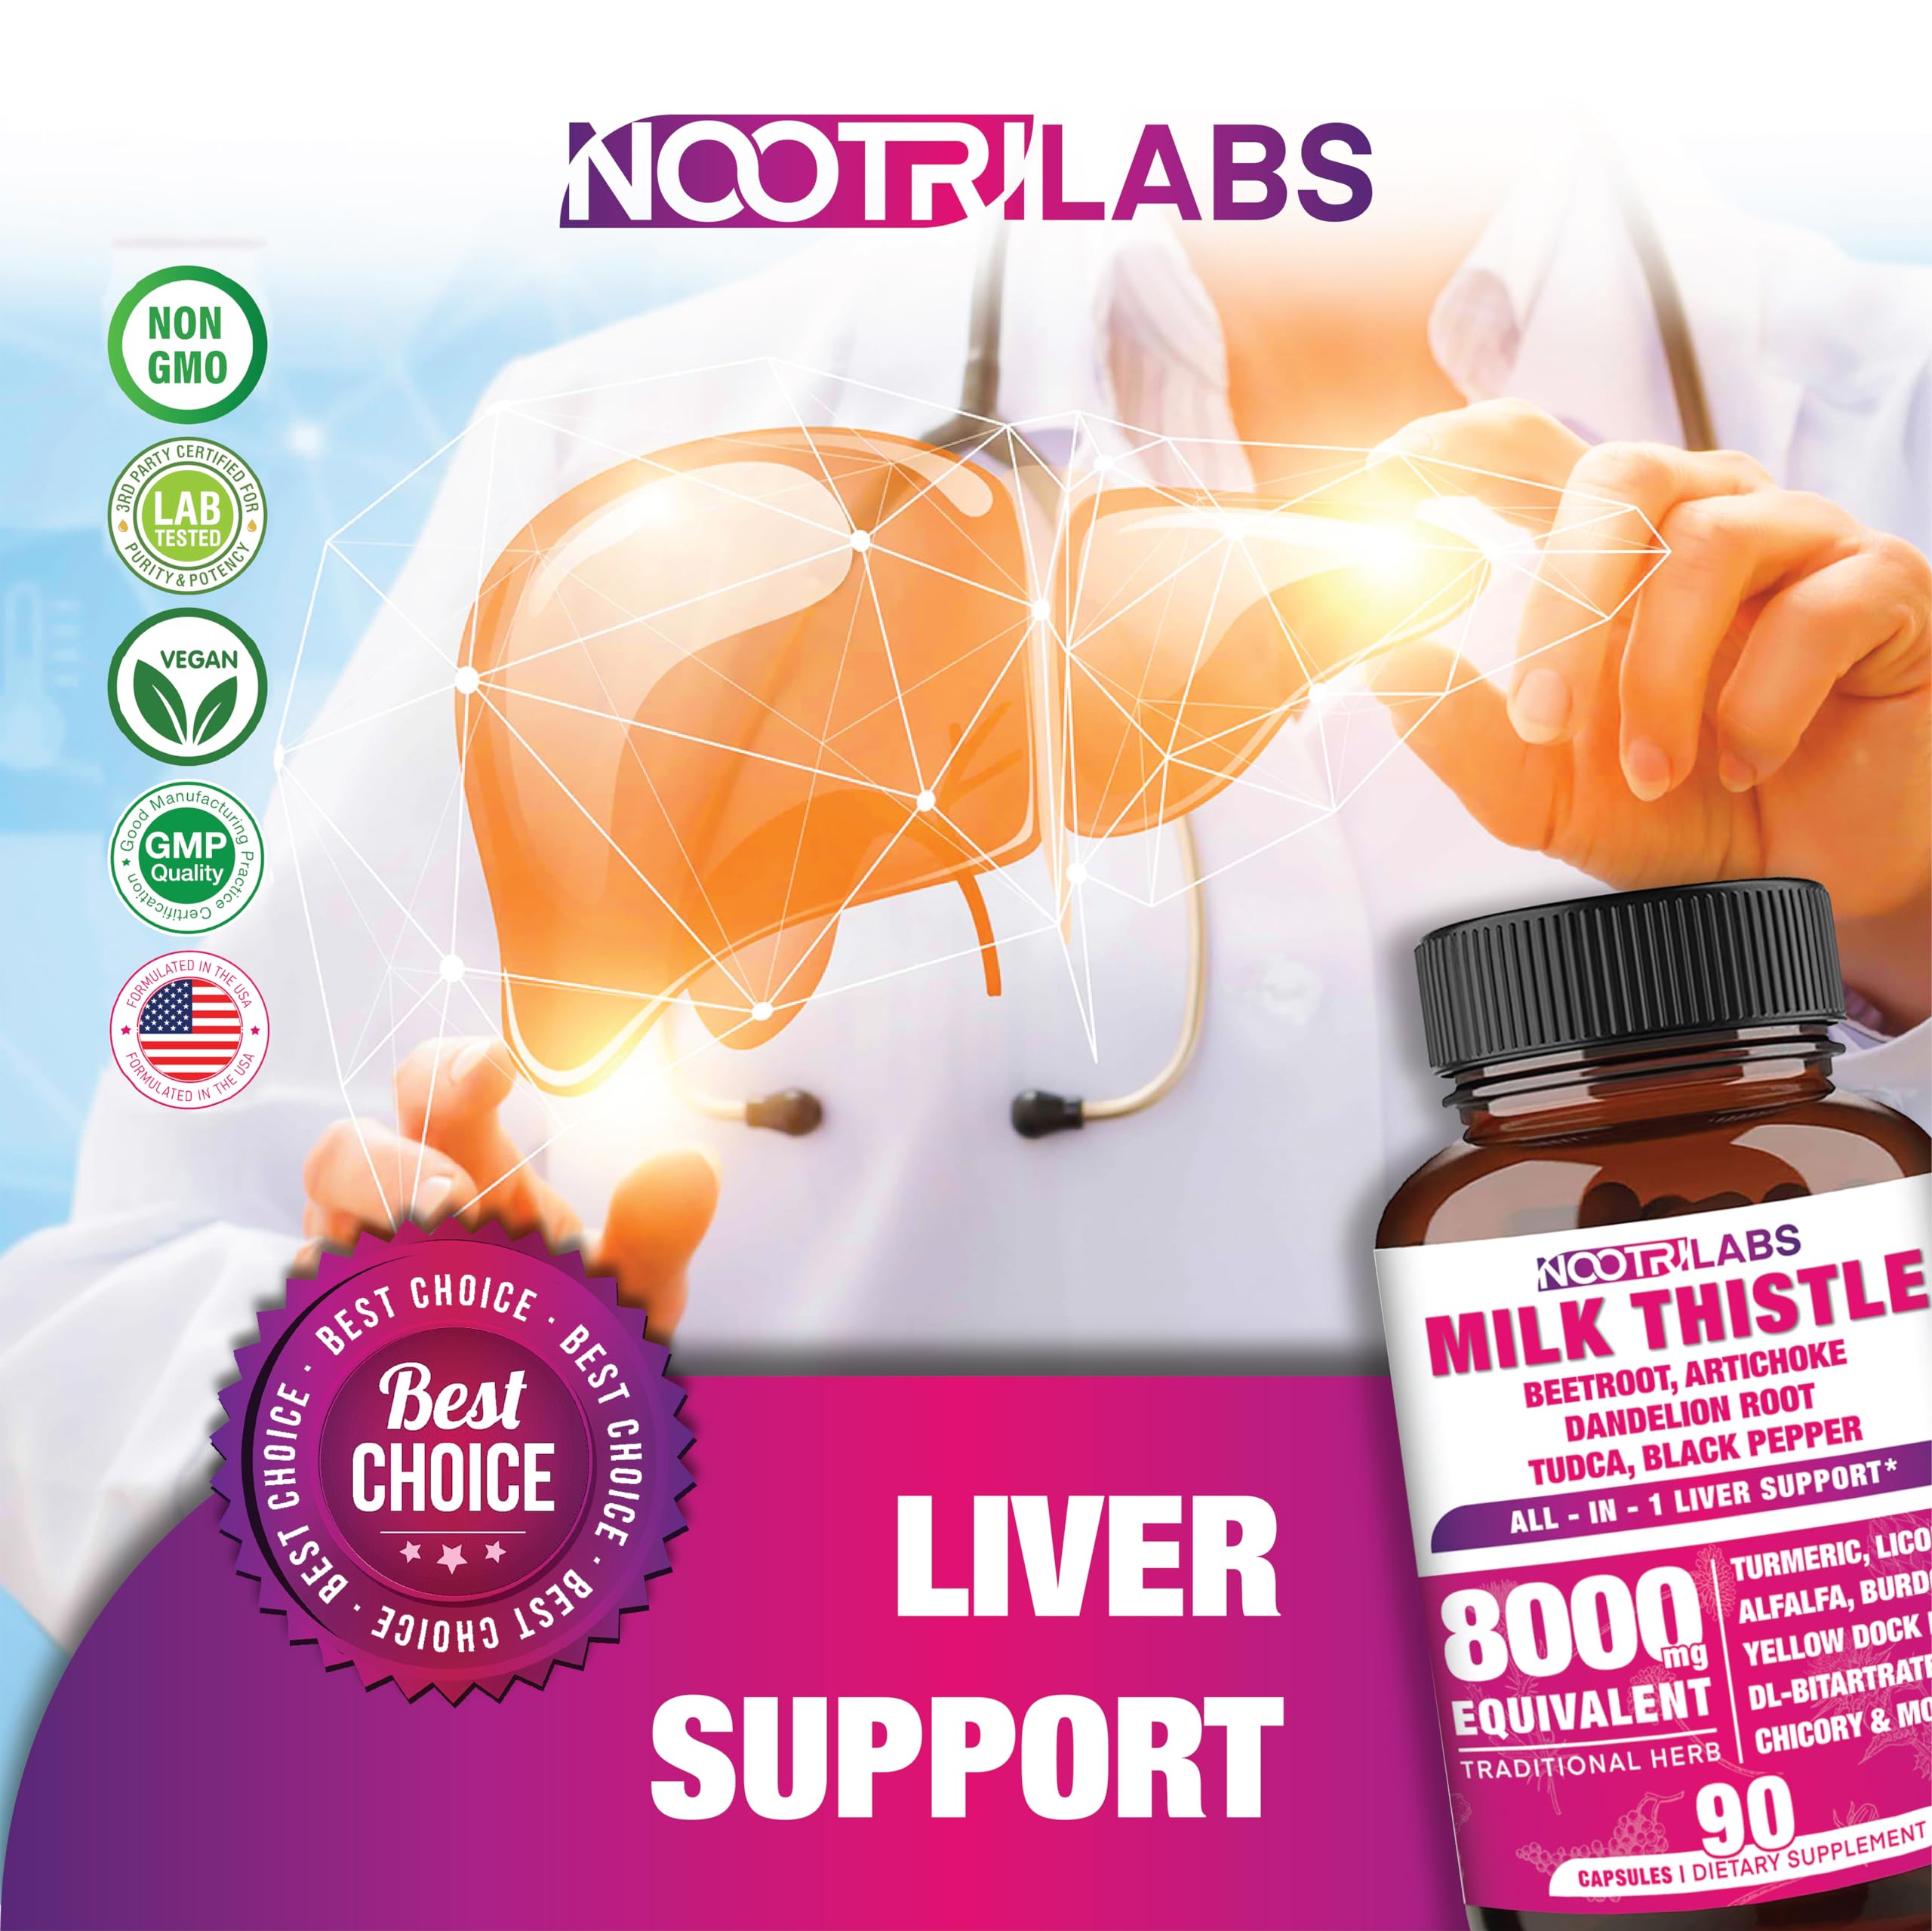 All-in-1 8000mg Milk Thistle Liver Support - 90 Vegan Capsules